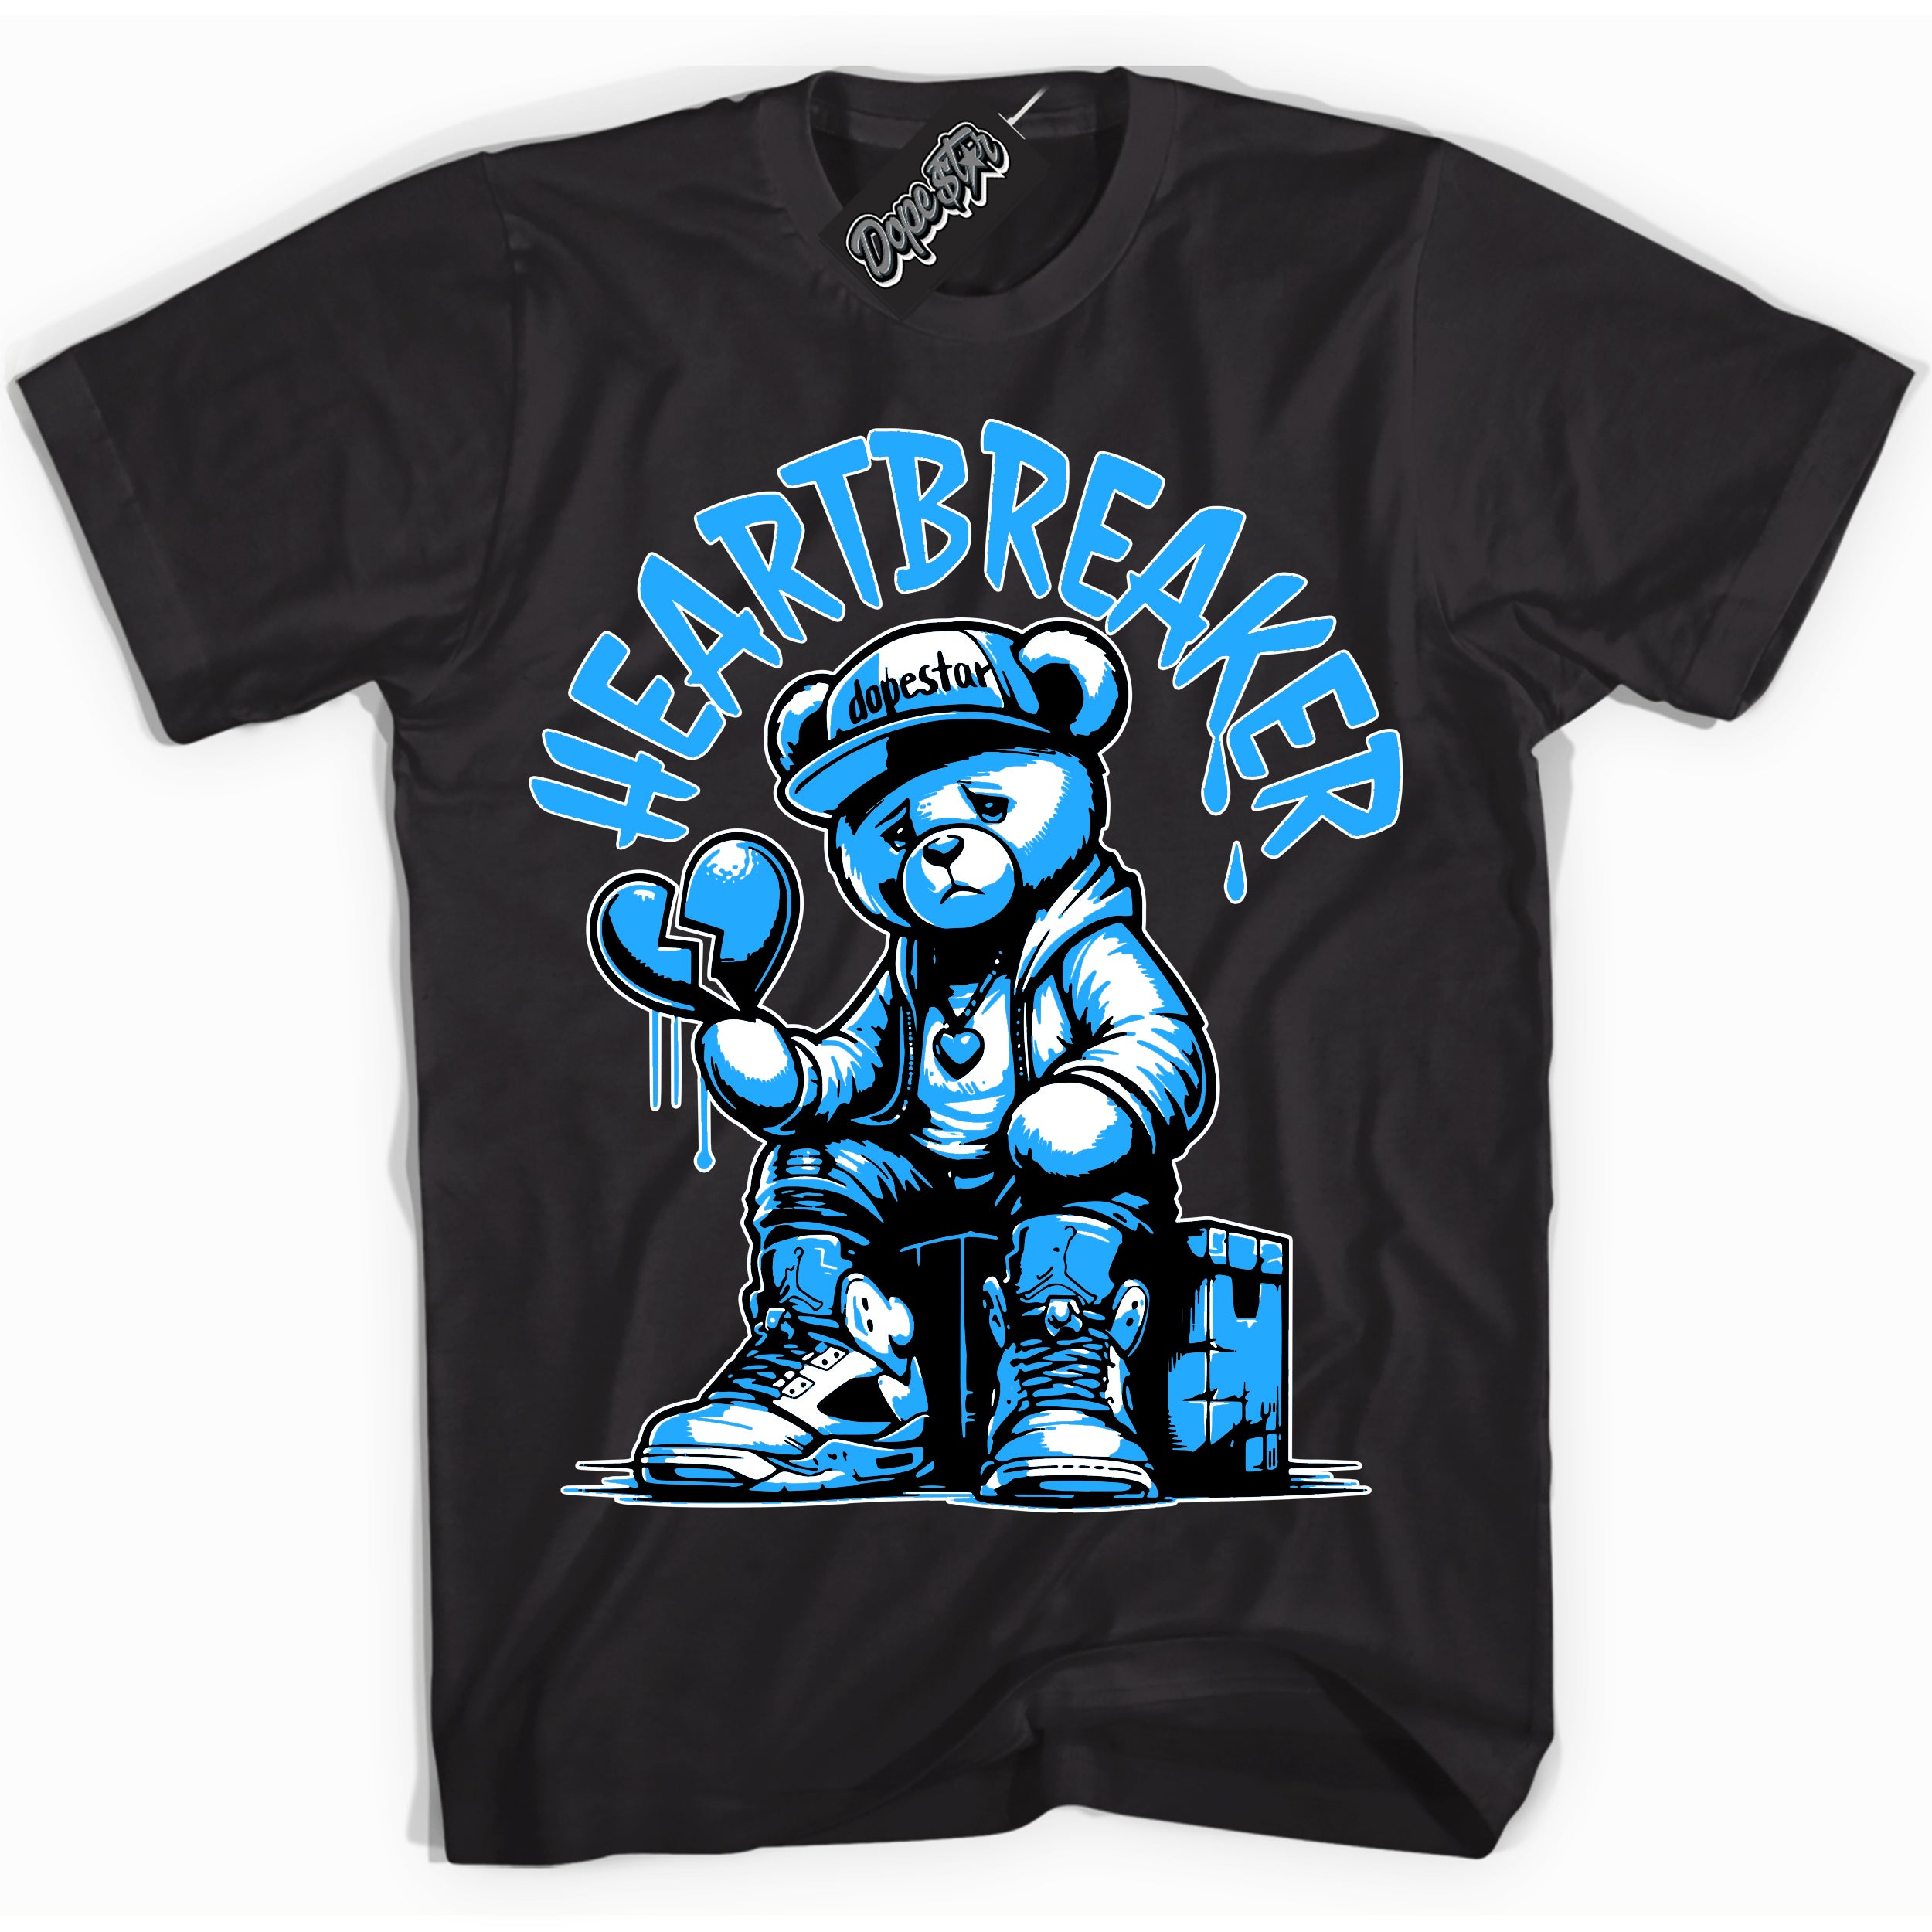 Cool Black graphic tee with “ Heartbreaker Bear ” design, that perfectly matches Powder Blue 9s sneakers 